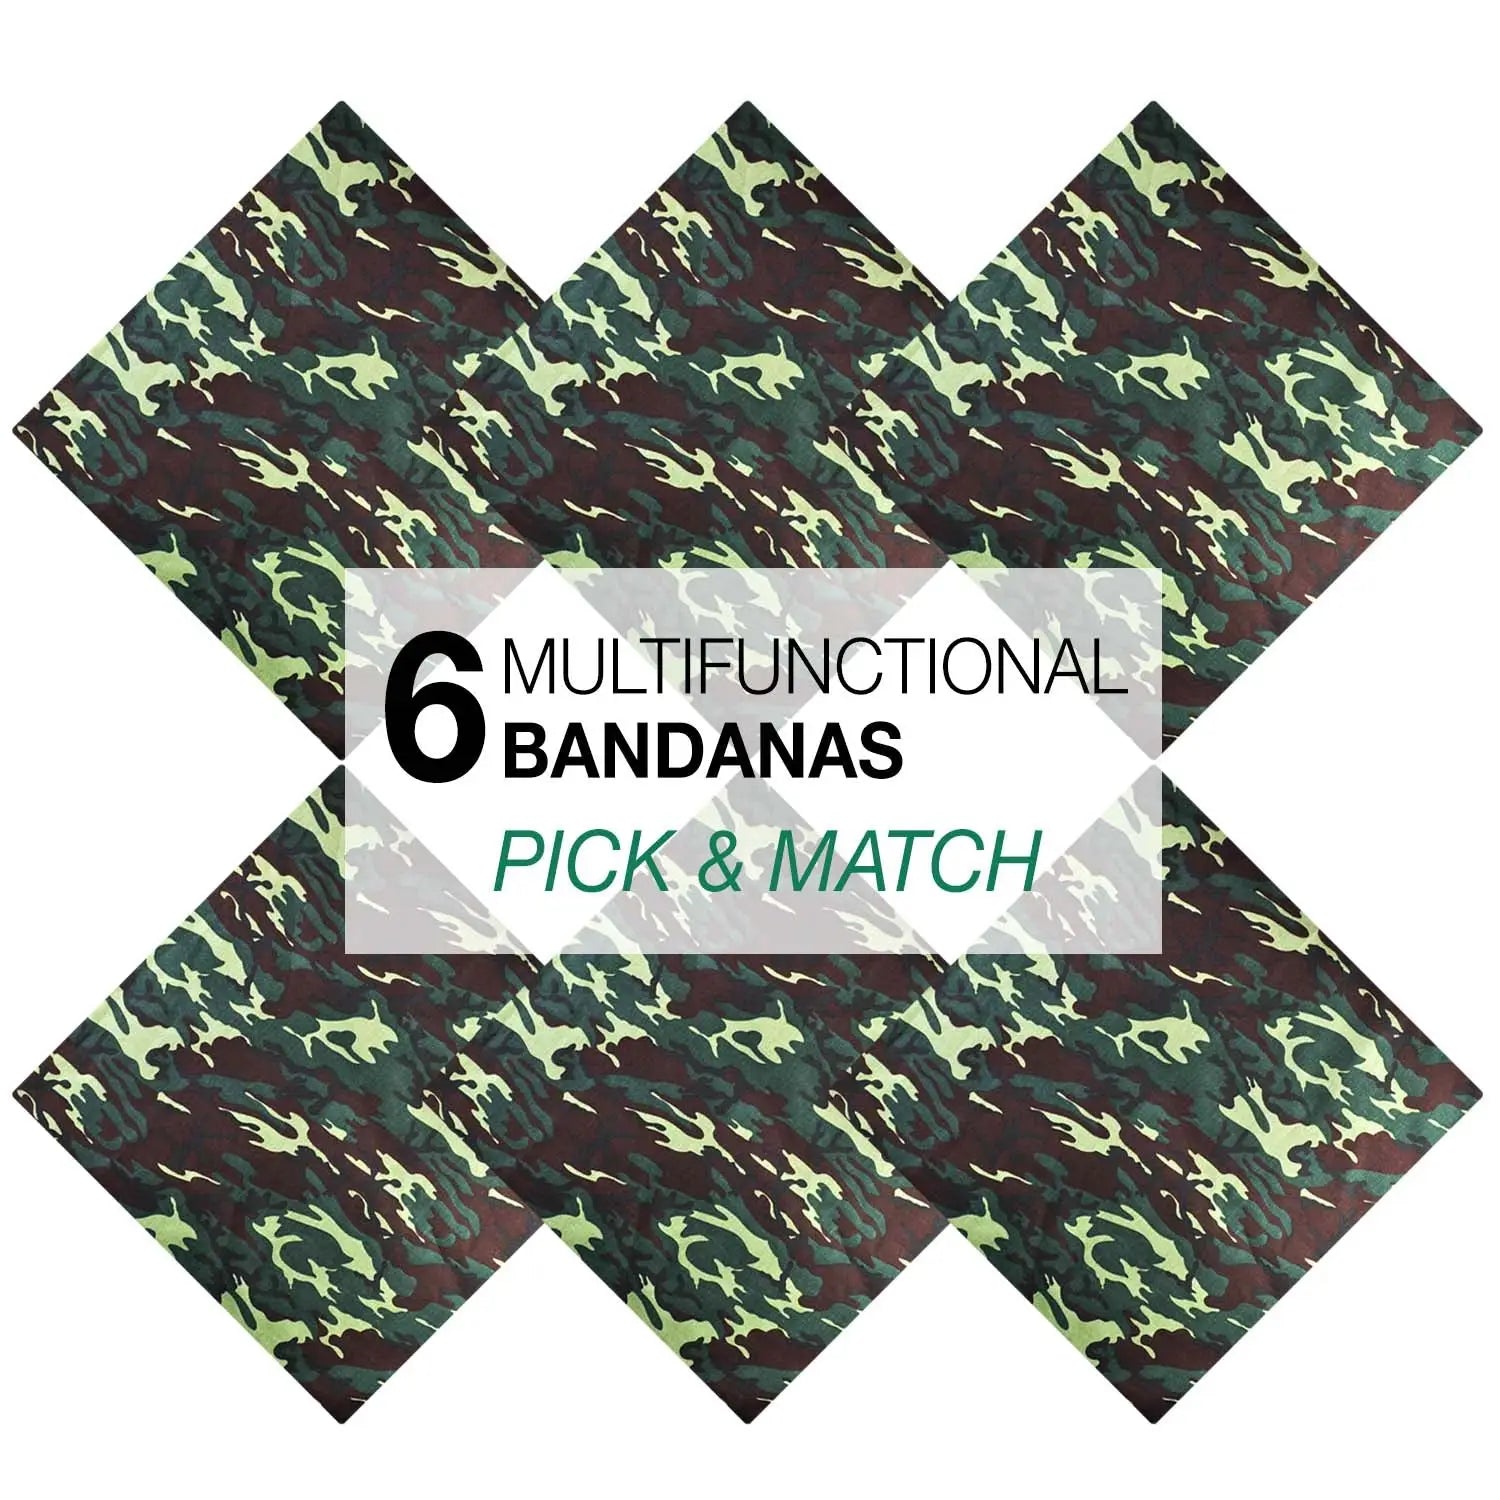 Camouflage military bandana with pack camouflage pattern in top right corner.